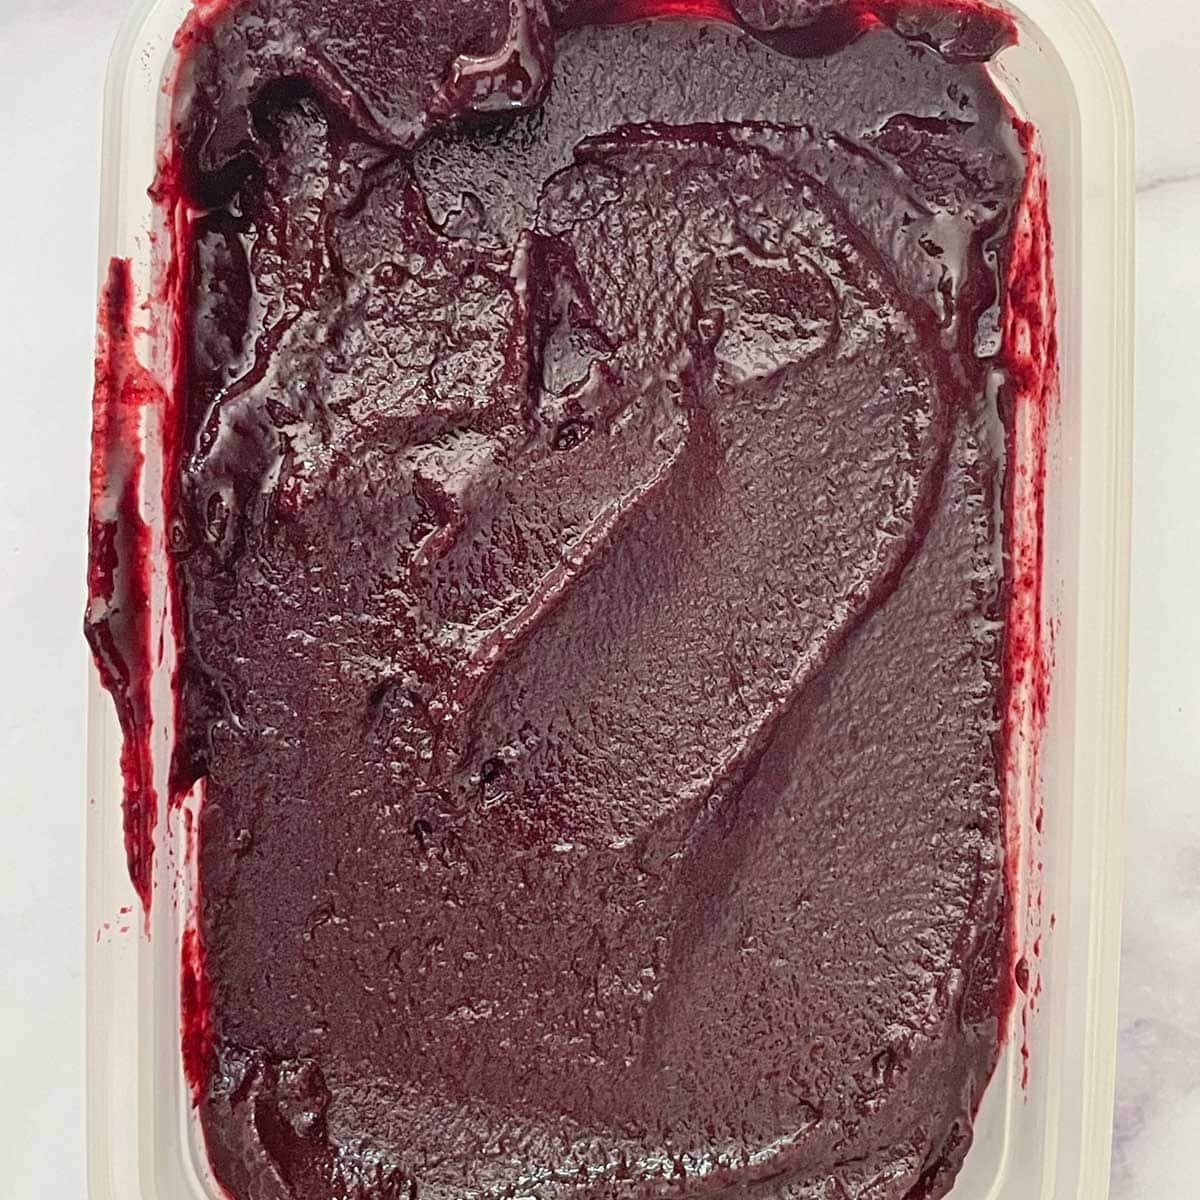 Churned Blueberry sorbet mix in a container.